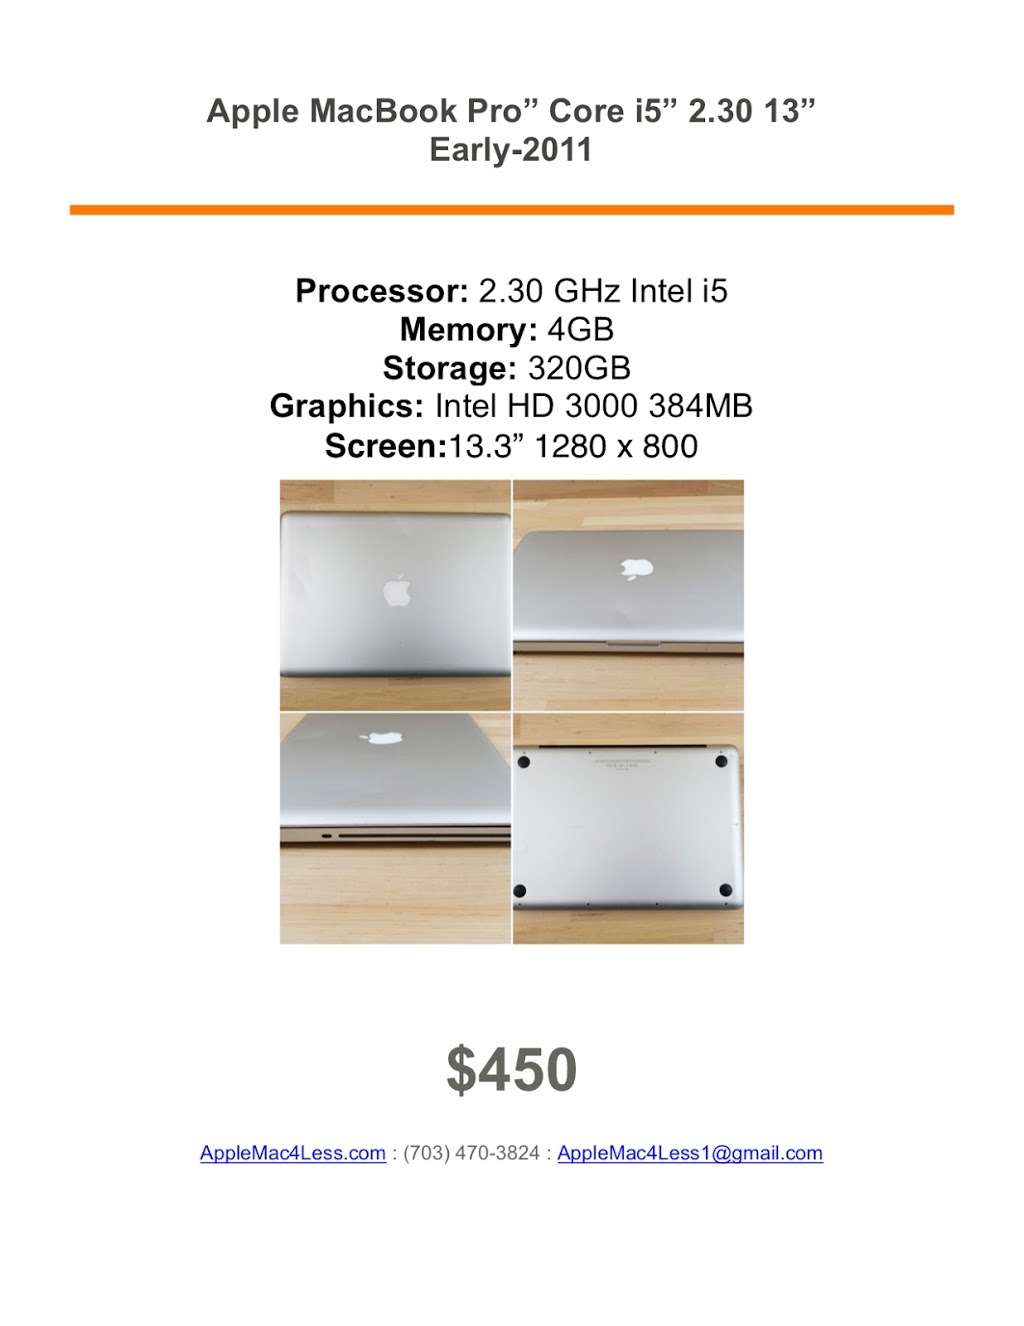 AppleMac4less | 20821 Shakespeare Dr, Germantown, MD 20876 | Phone: (703) 470-3824